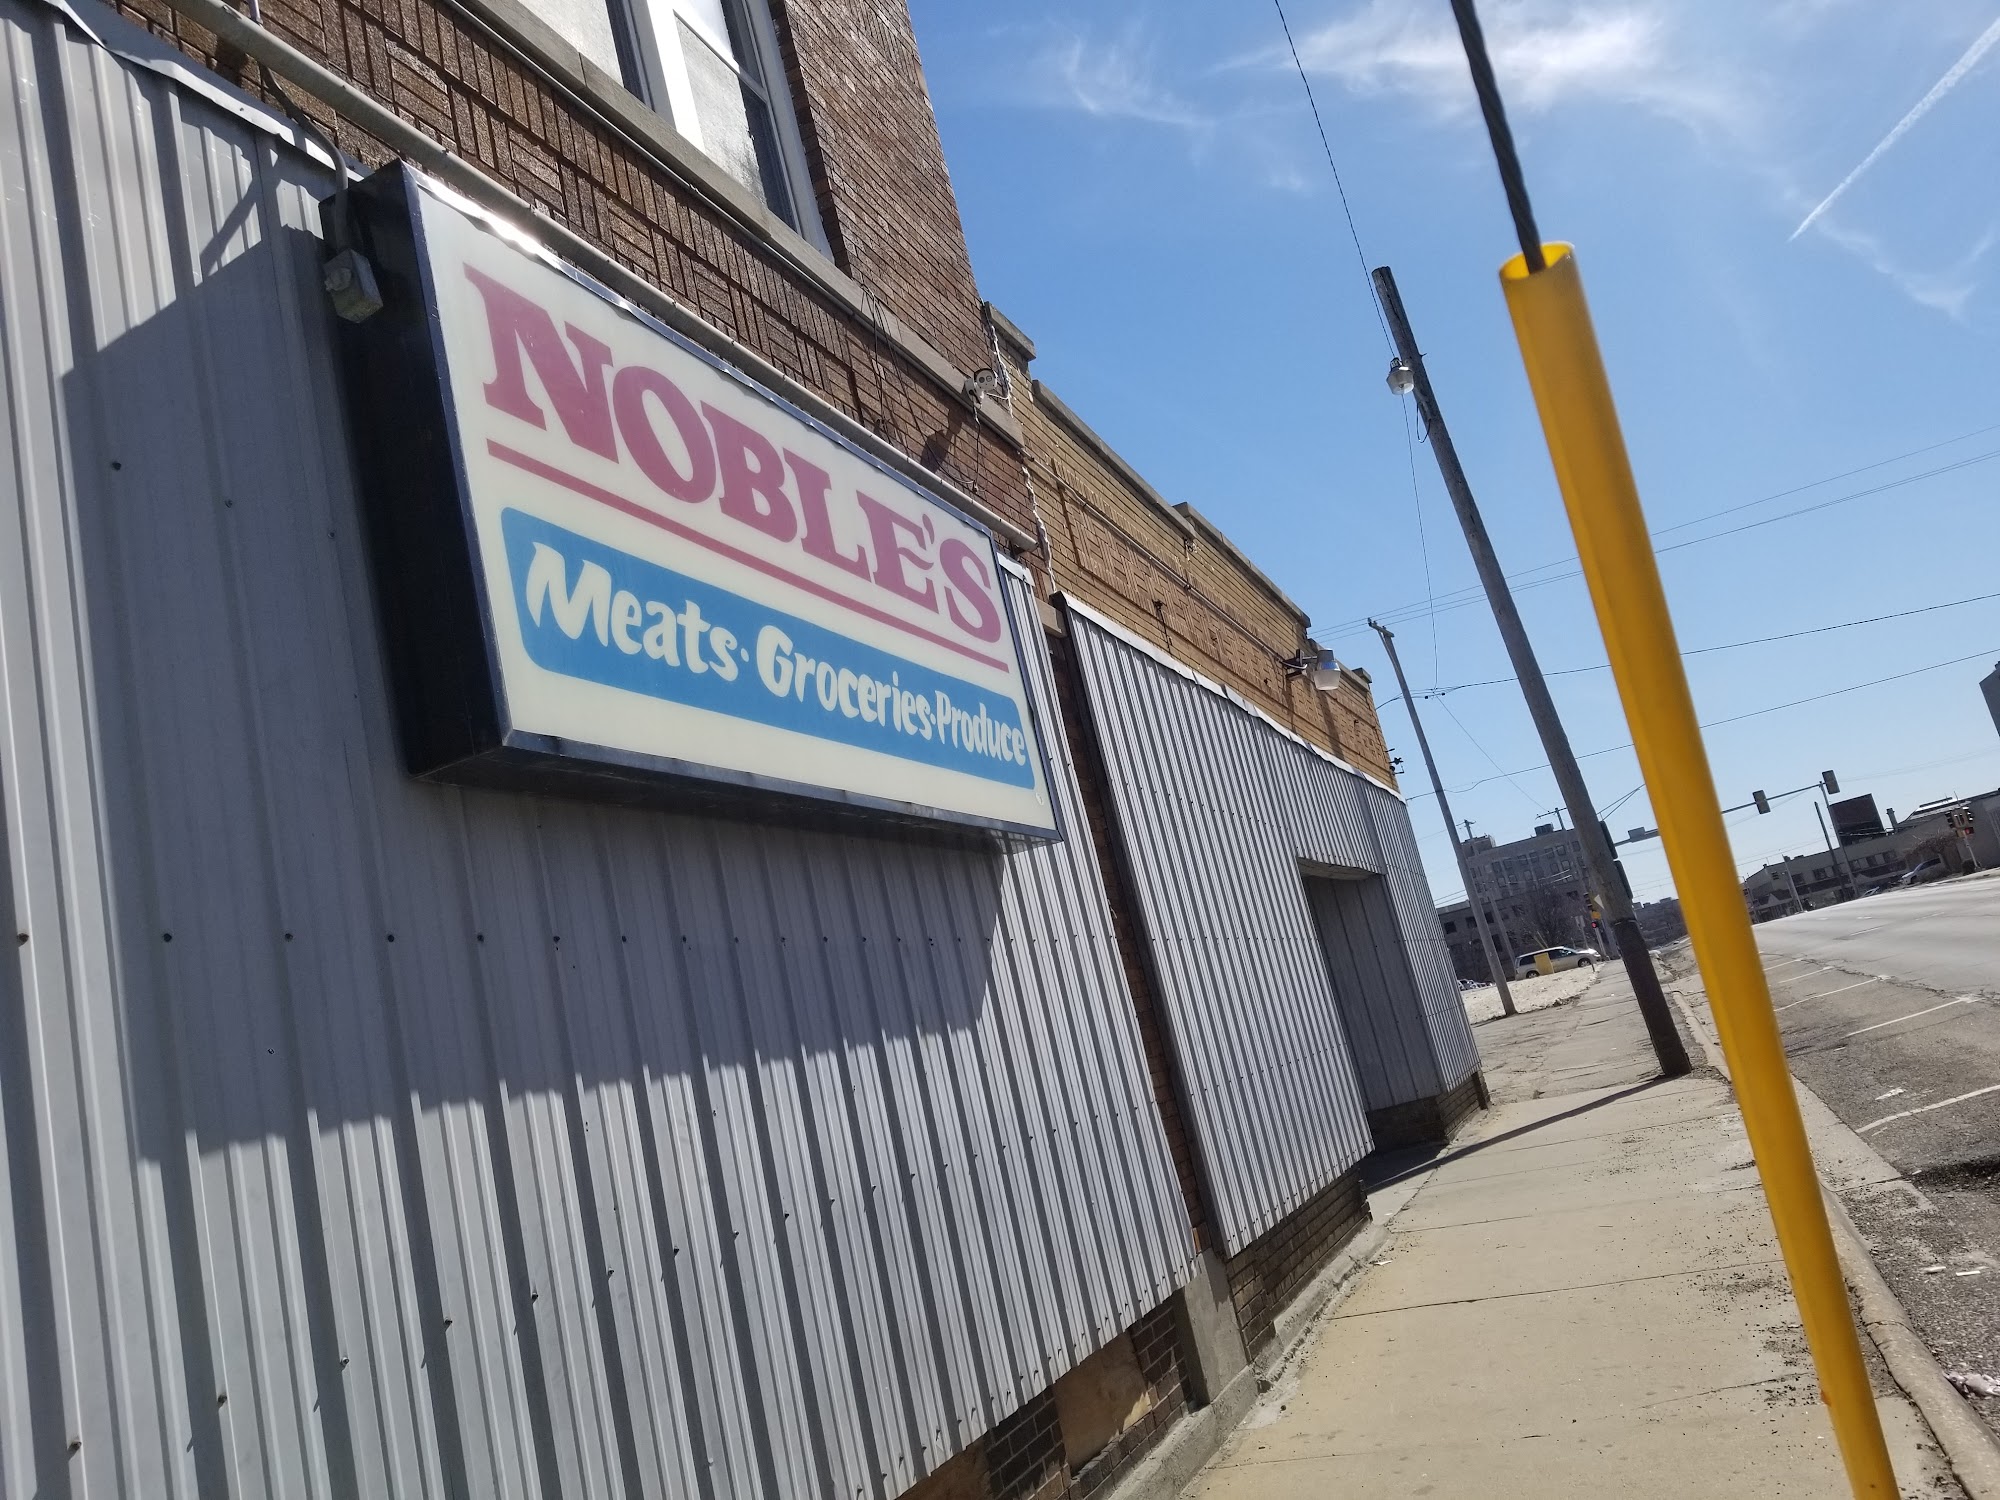 Noble's Groceries